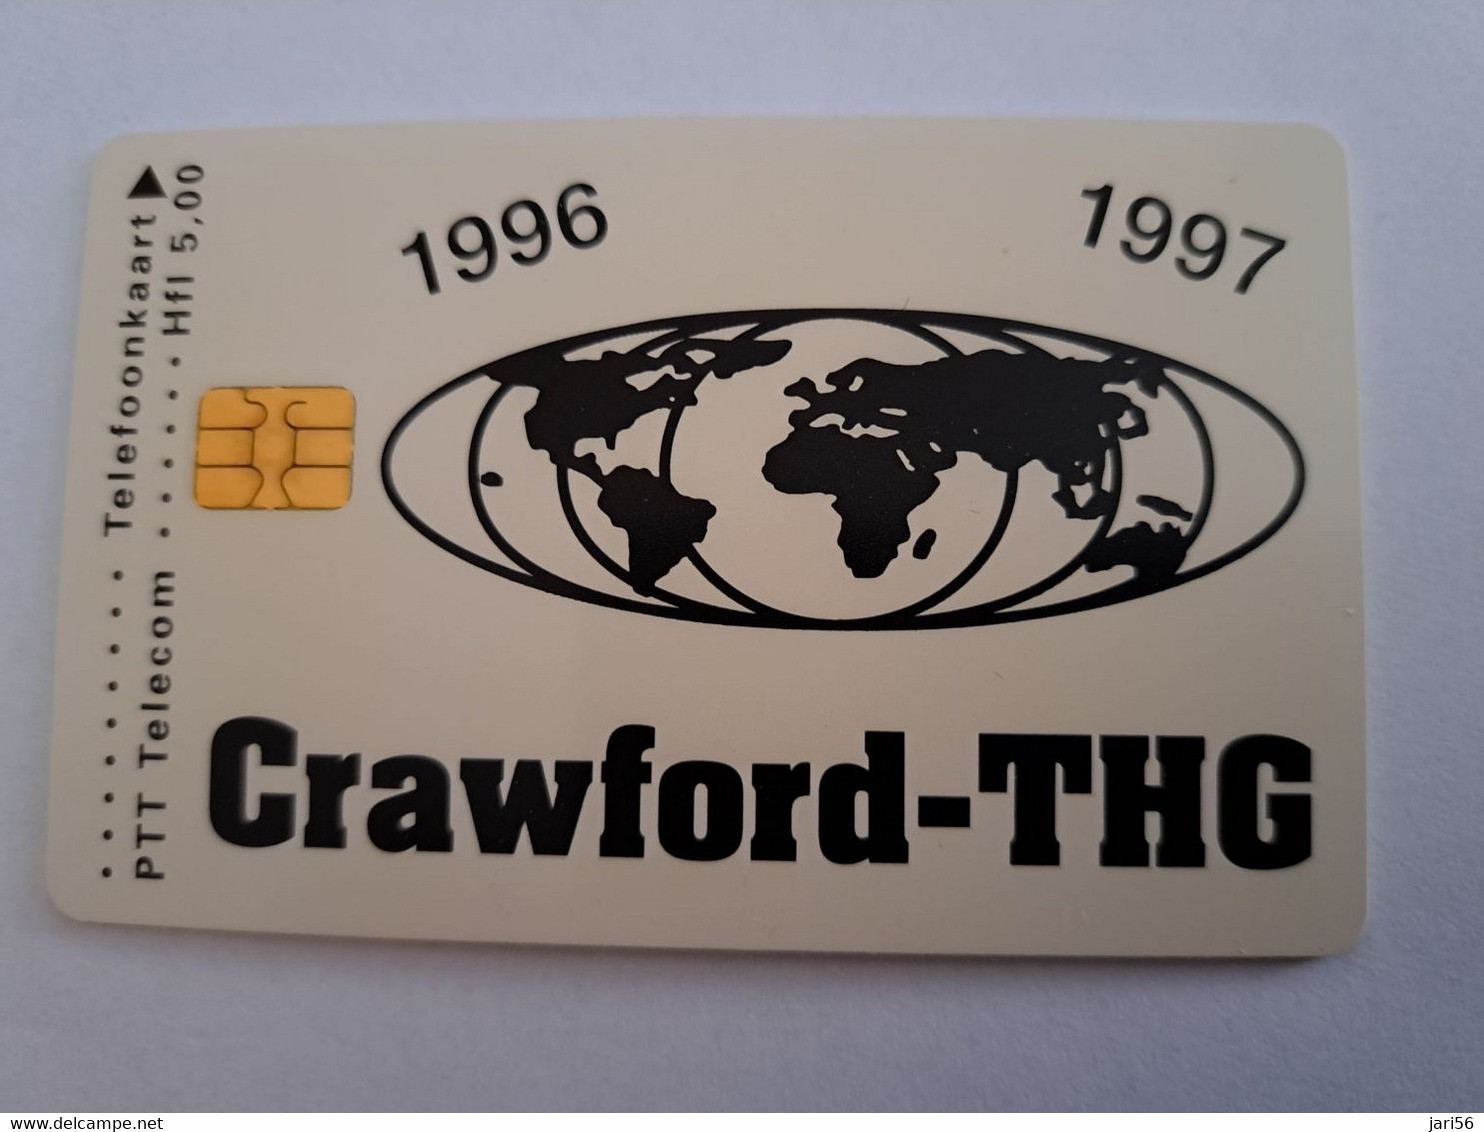 NETHERLANDS  ADVERTISING CHIPCARD  CRD 430 CRAWFORD        MINT    ** 12046** - Private